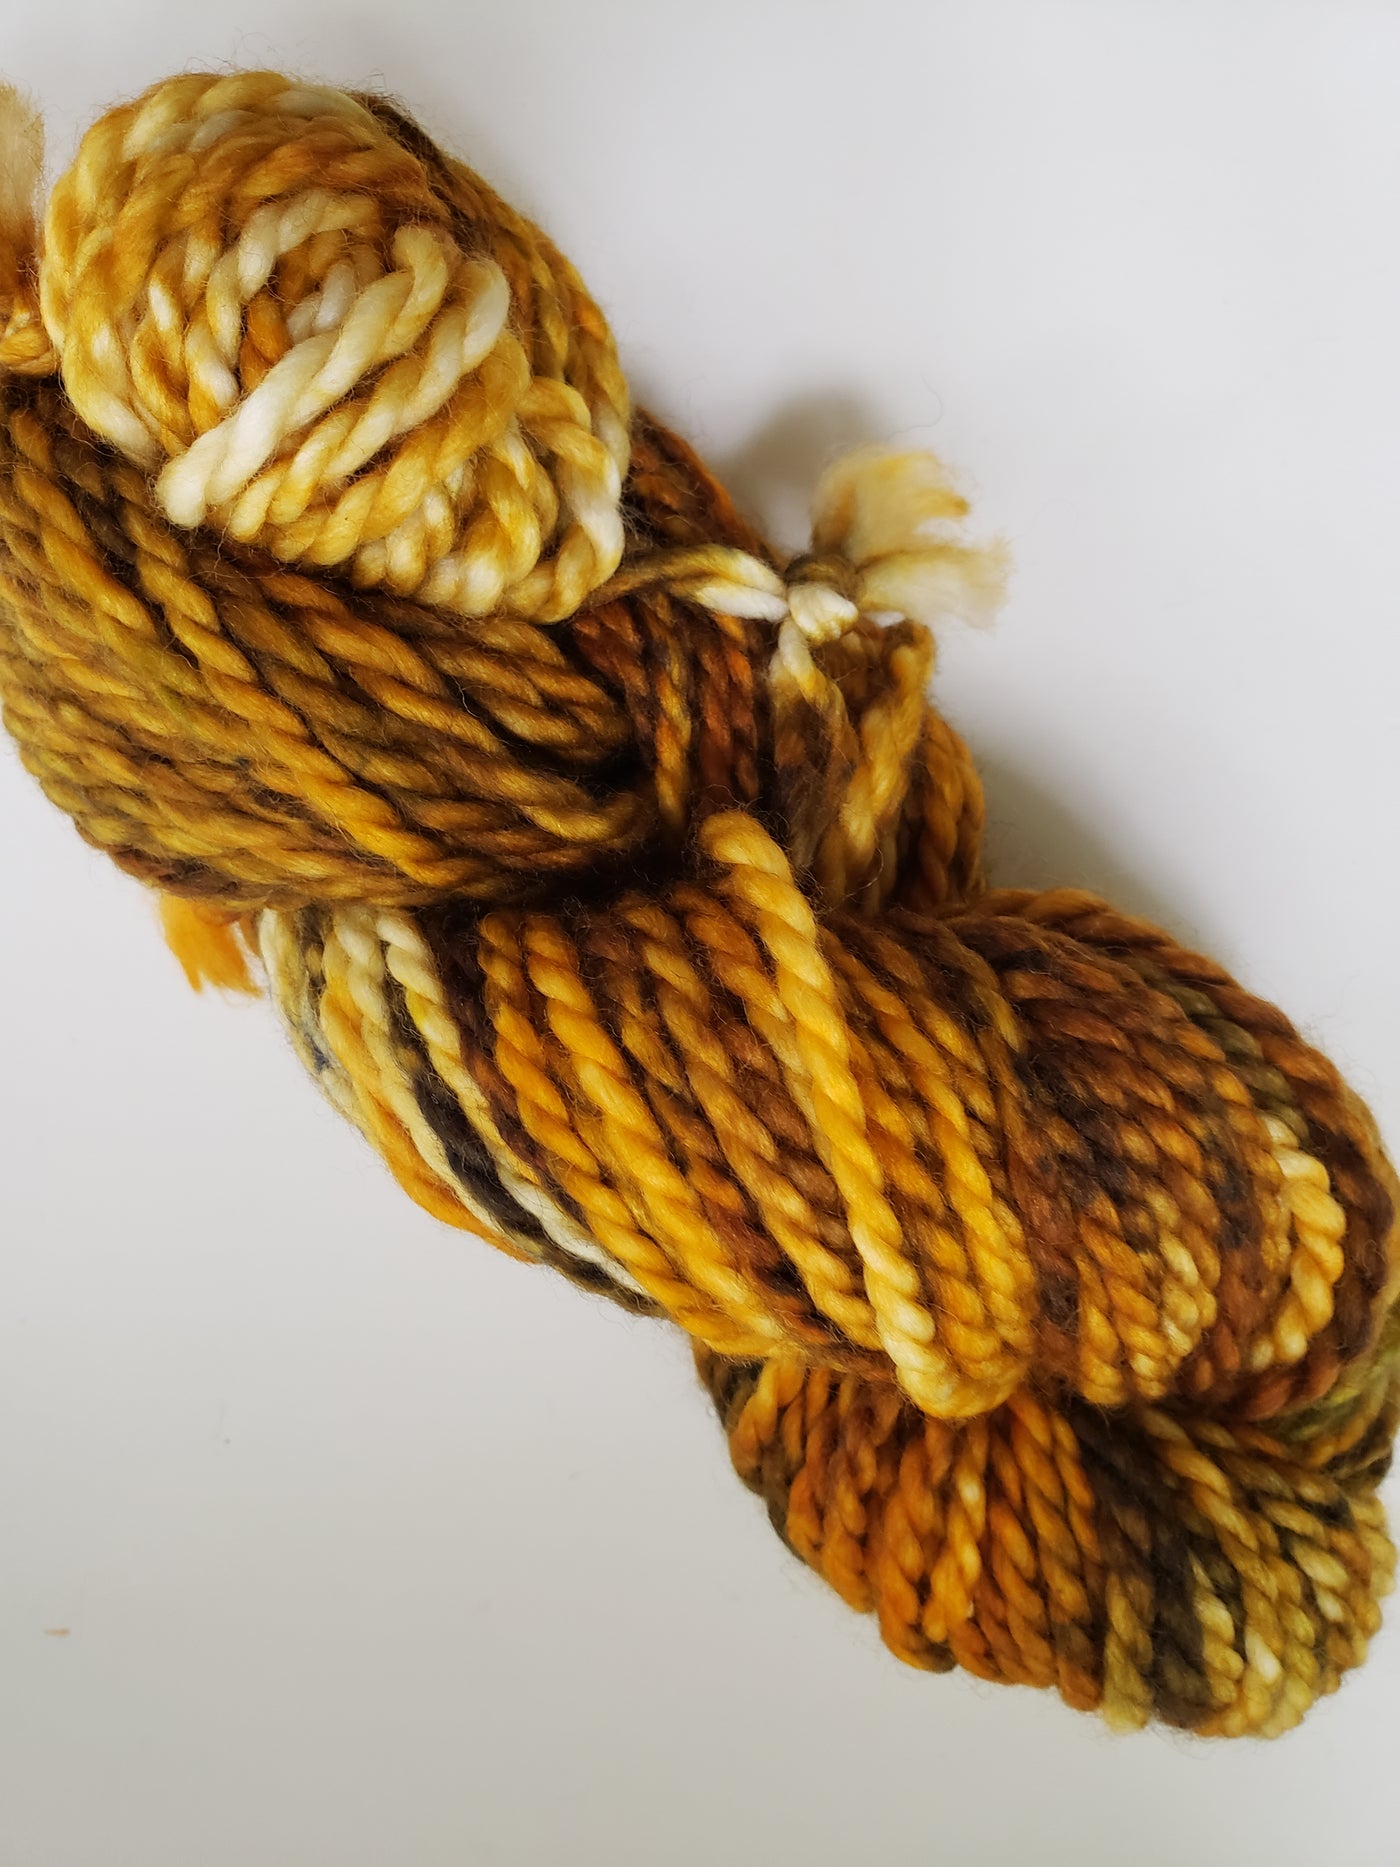 SUNFLOWERS - BIG TWISTY 2 PLY - Hand Dyed Shades of Yellow, Brown